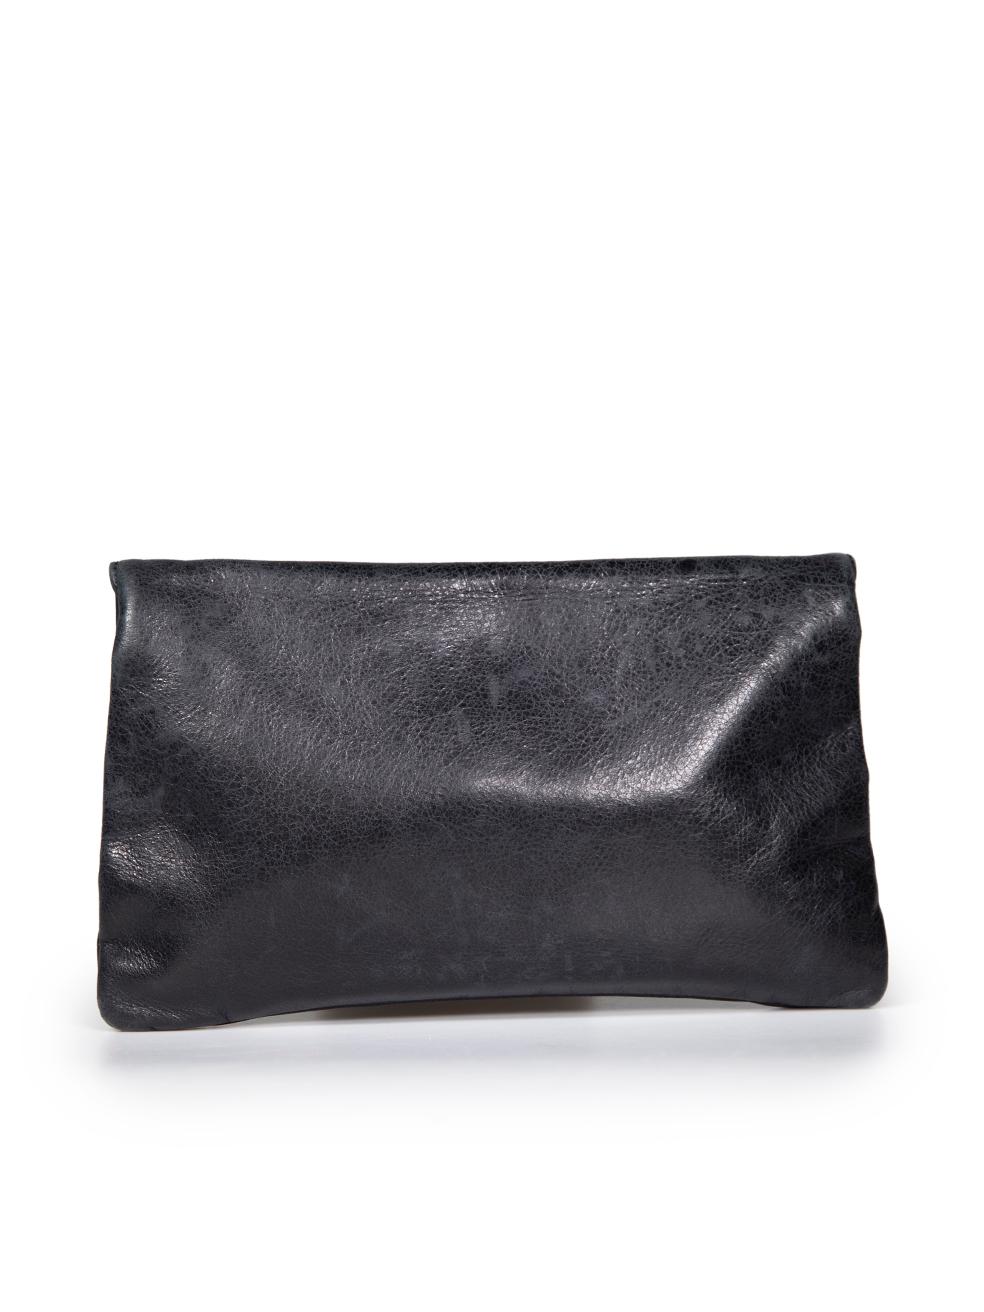 Balenciaga Black Leather Giant City Clutch In Excellent Condition For Sale In London, GB